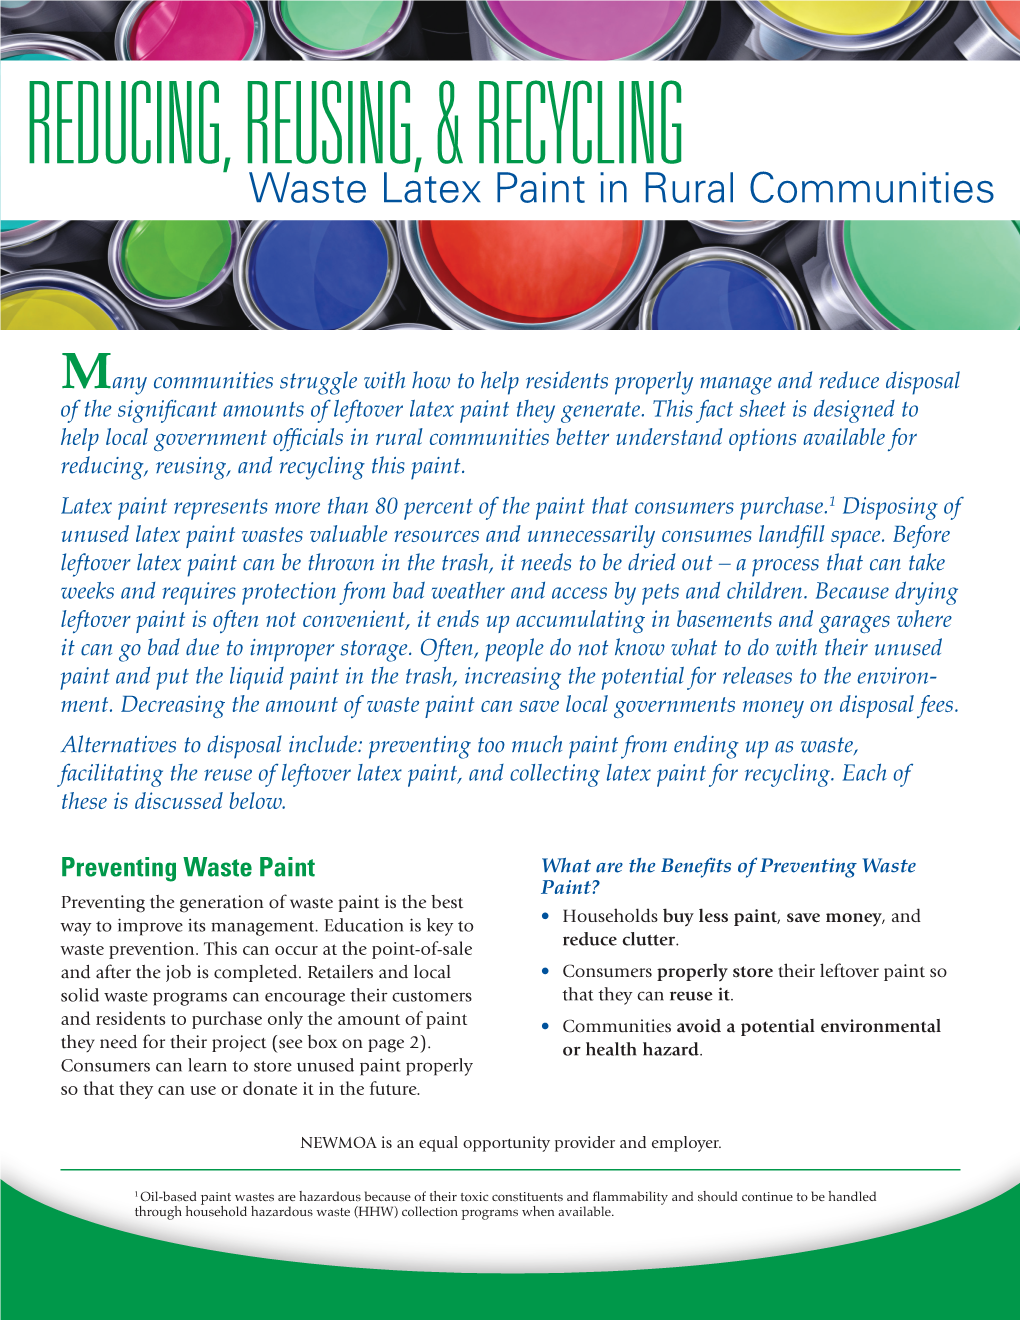 Reducing, Reusing, & Recycling Waste Latex Paint in Rural